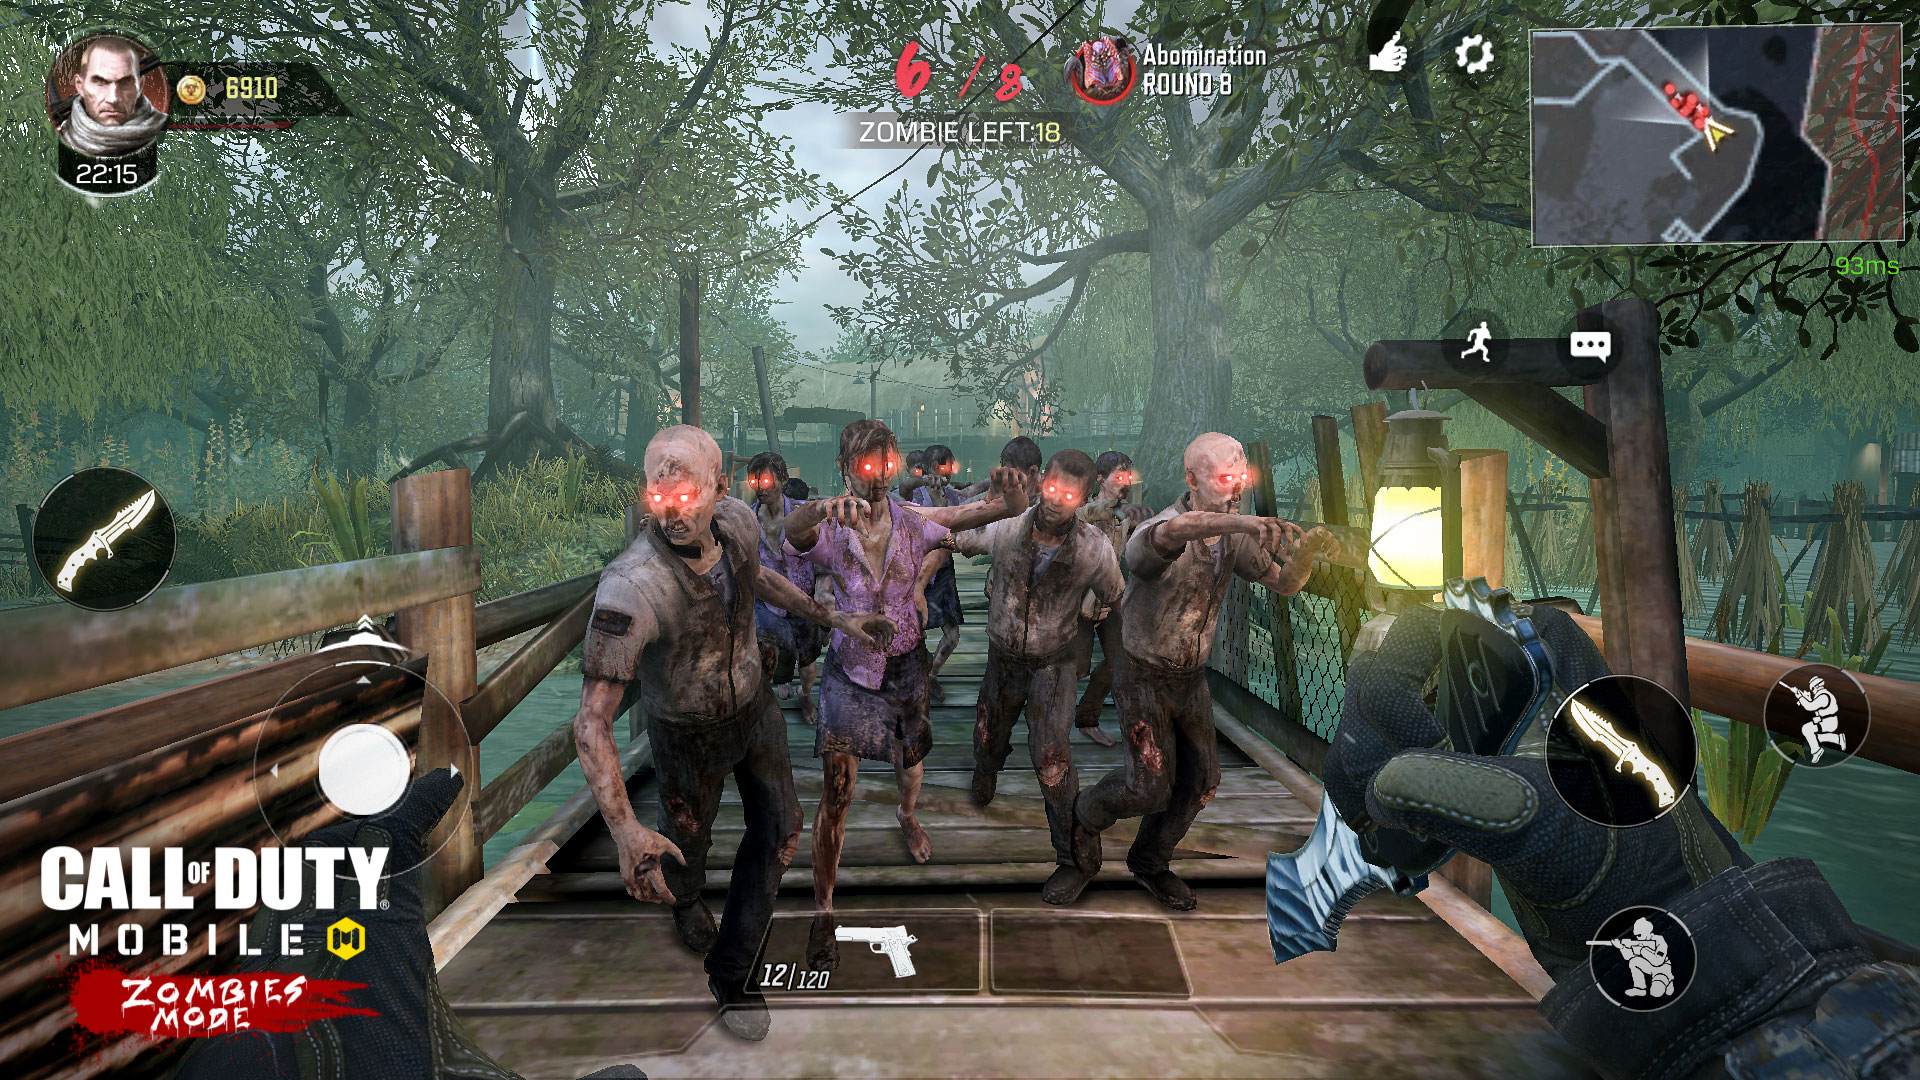 Wondering how to play Call of Duty Mobile Zombies? We've some good news